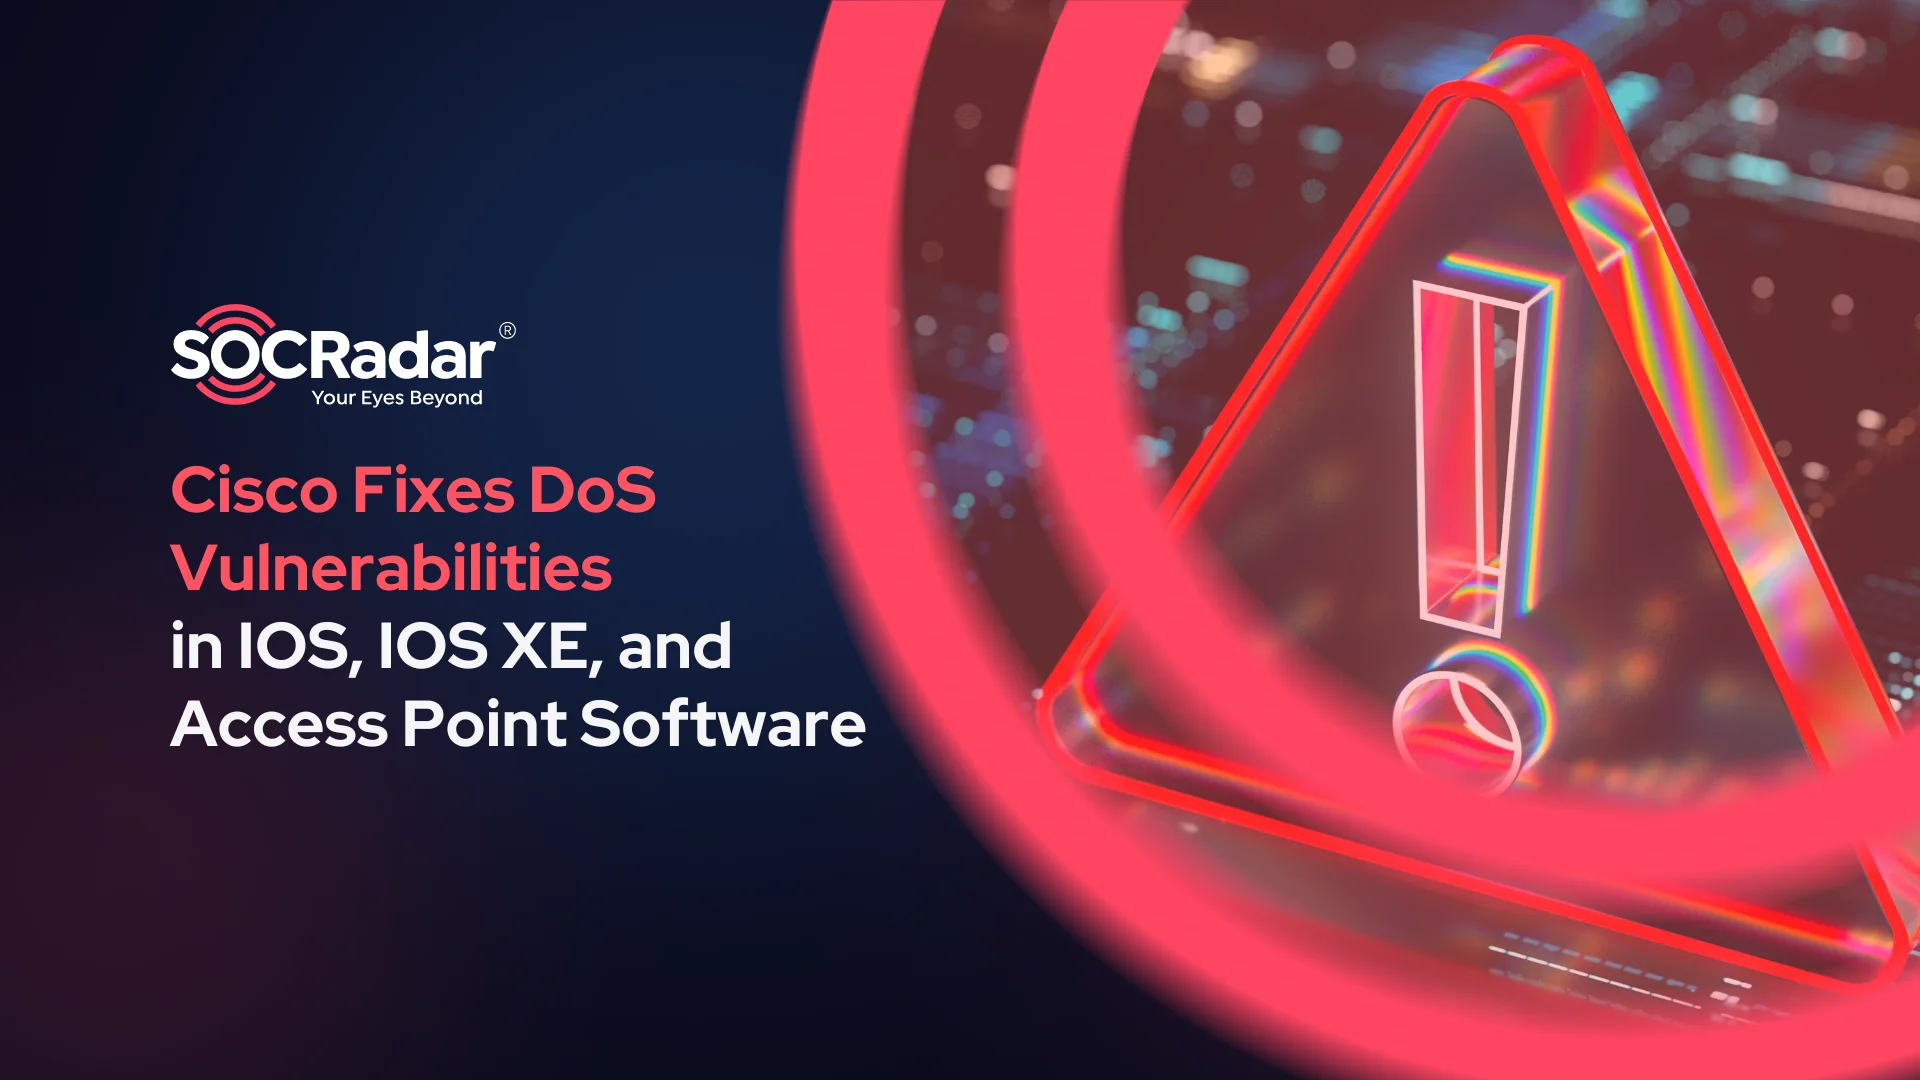 SOCRadar® Cyber Intelligence Inc. | Cisco Fixes Numerous DoS Vulnerabilities in IOS, IOS XE, and Access Point Software